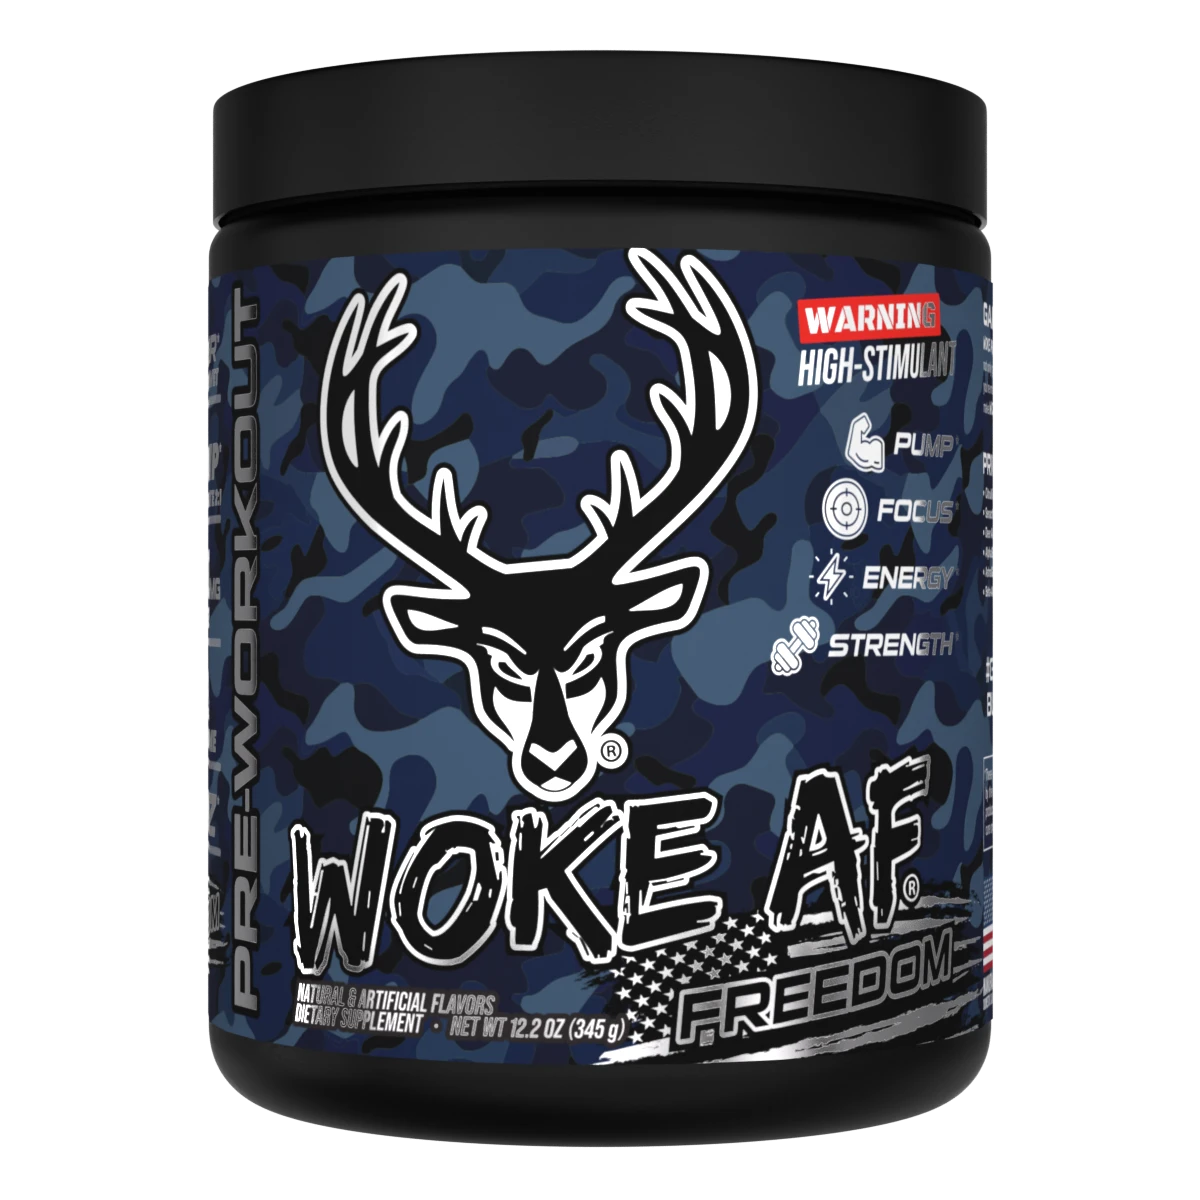 Woke AF Pre-Workout by Bucked Up (DAS)